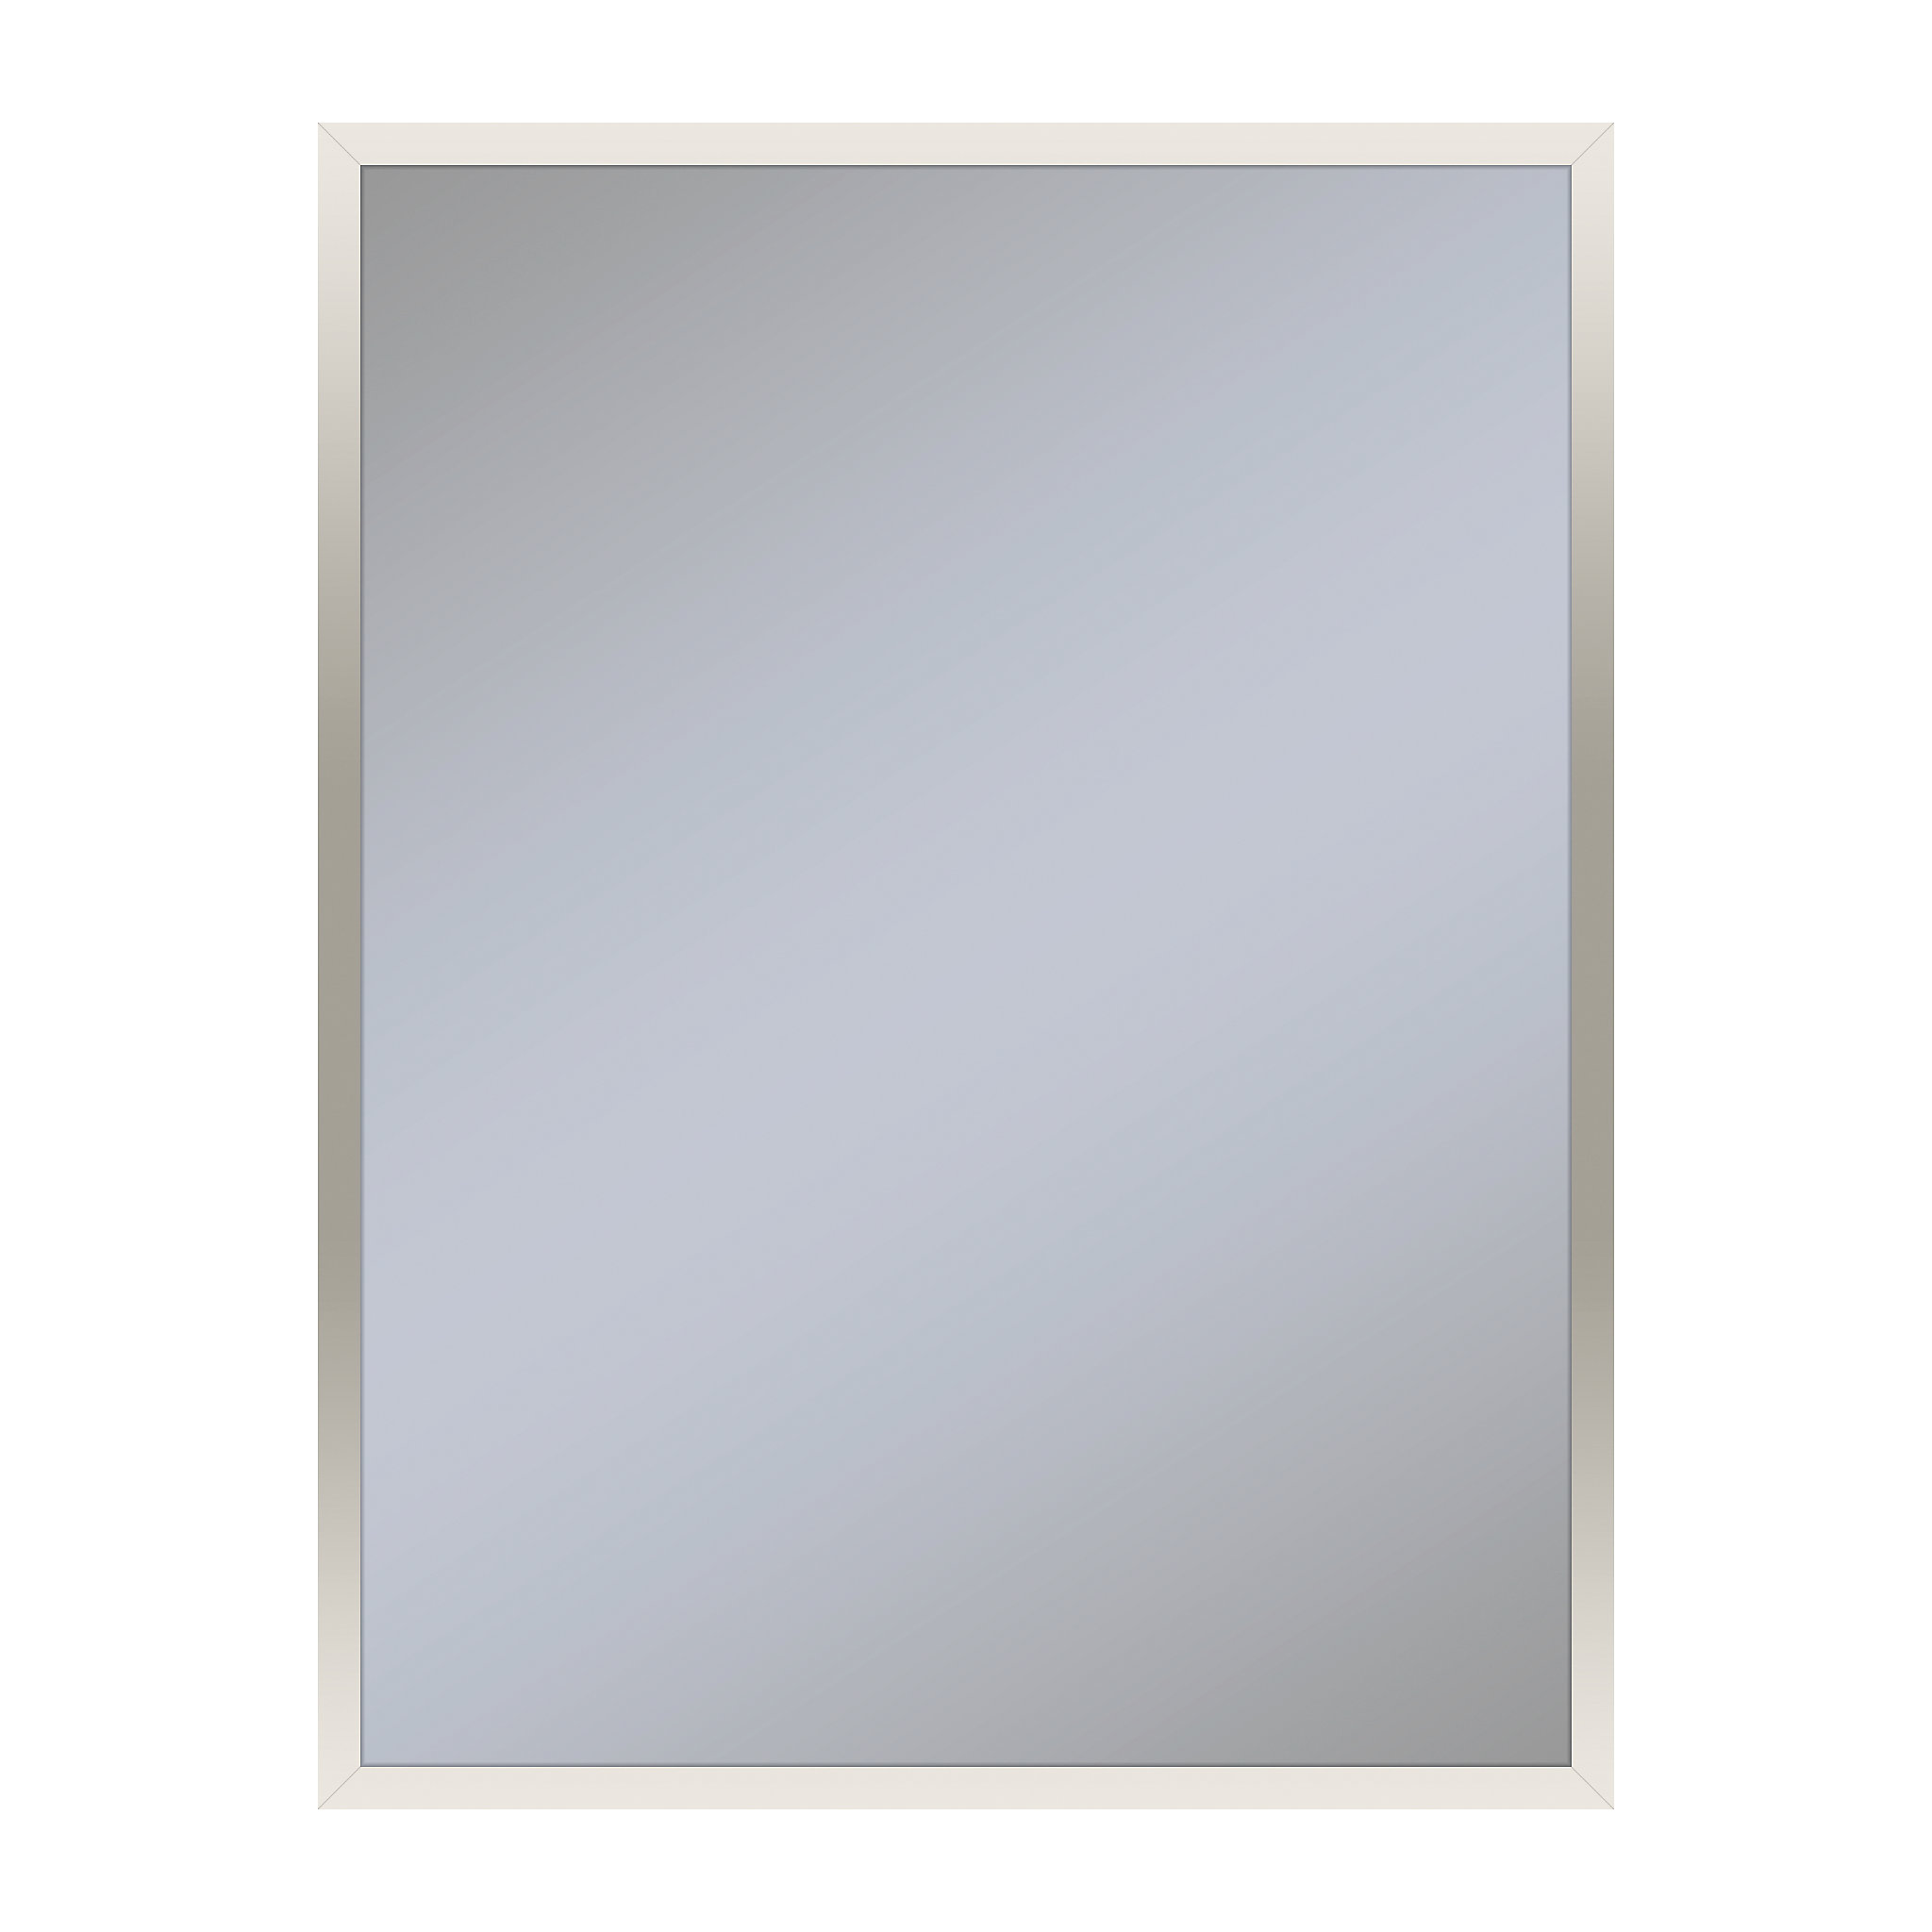 Robern PC2430D6TNN77 Profiles Framed Cabinet, 24" x 30" x 6", Polished Nickel, Non-Electric, Reversible Hinge